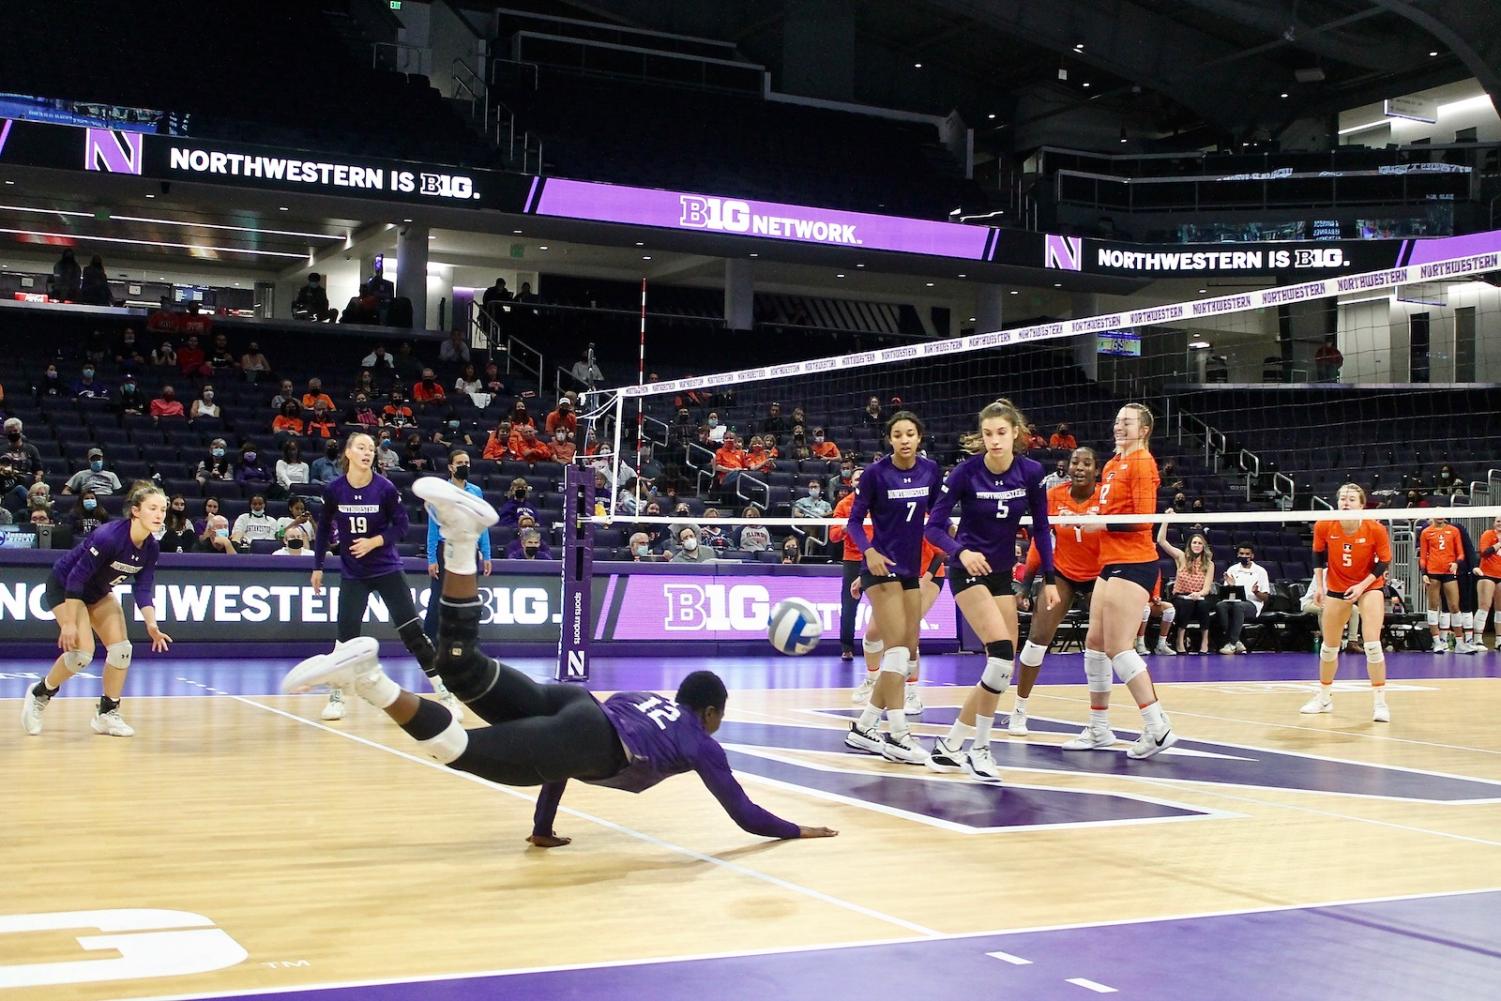 Player+in+purple+jersey+dives+to+floor+to+hit+ball.